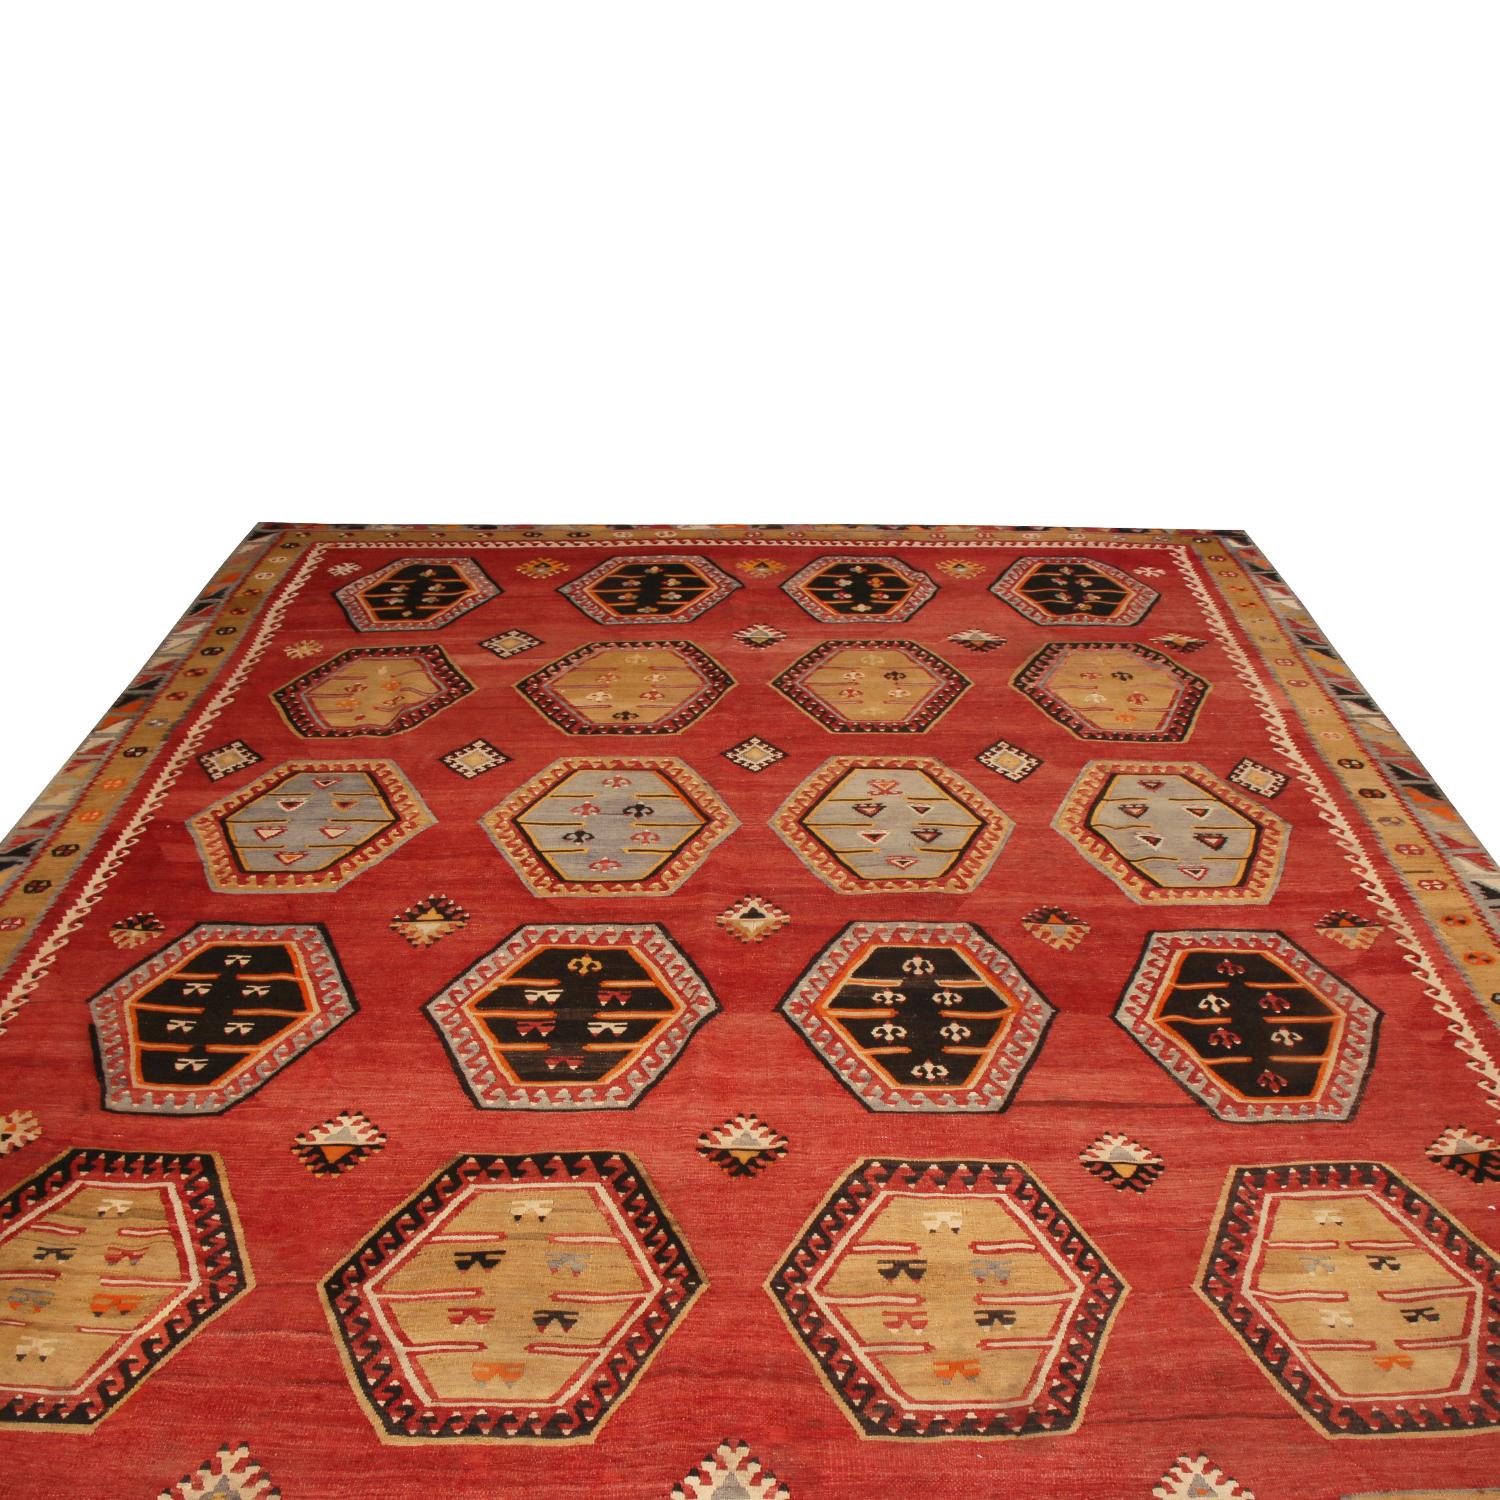 Originating from Turkey between 1950-1960, this vintage Anatolian wool Kilim rug enjoys an intriguing balance of lighter and richer colorways that has aged exceptionally well in this grounding portrait, featuring a tastefully abrashed burgundy red